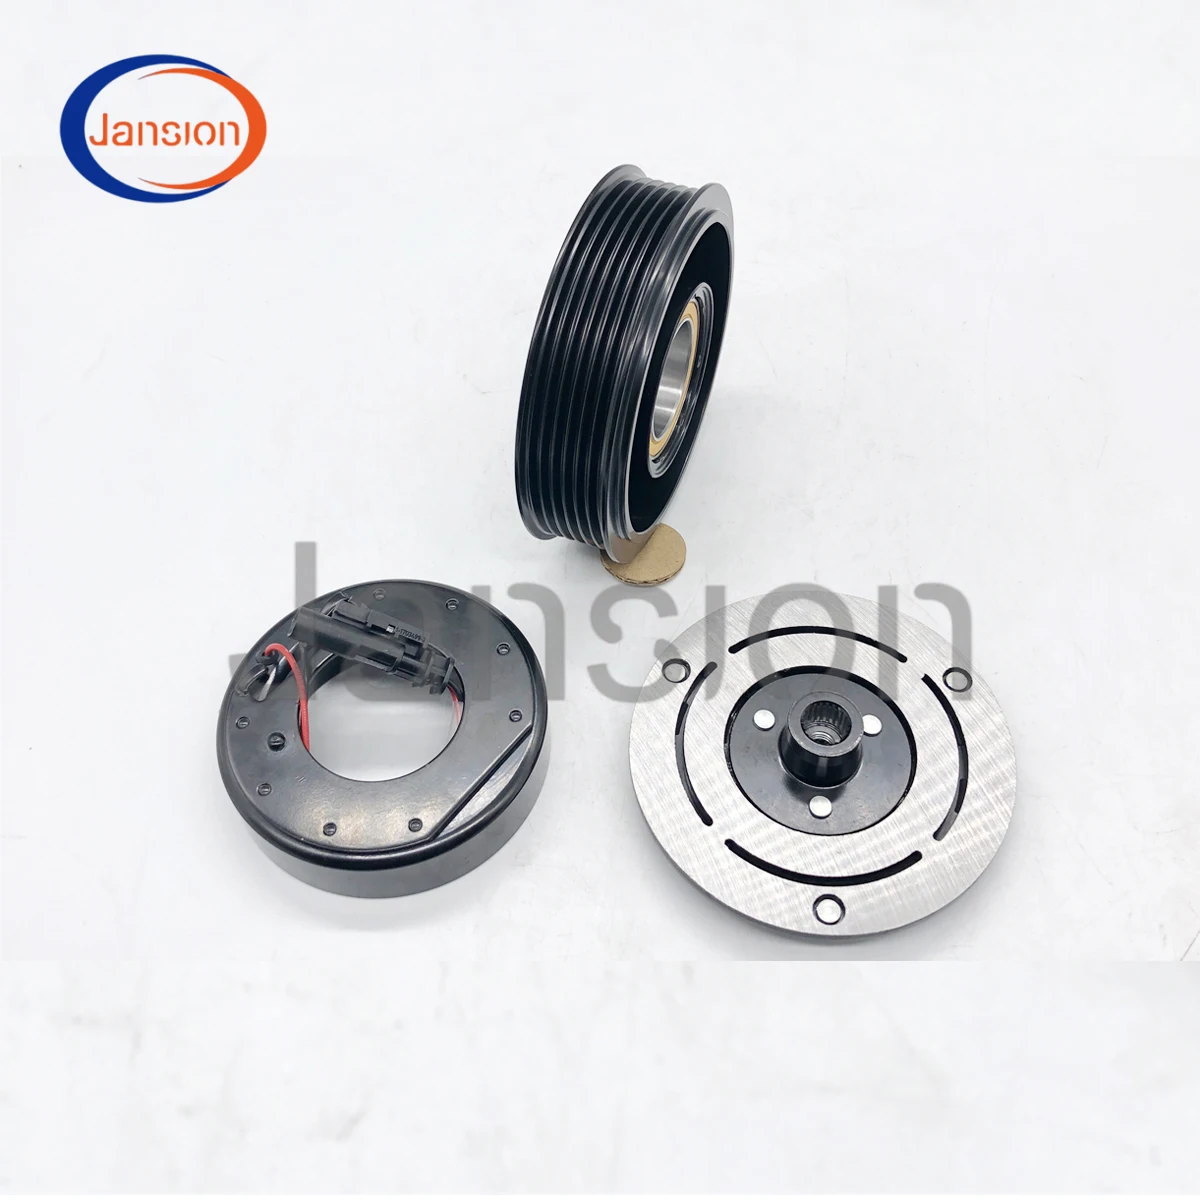 

AC A/C Air Conditioning Compressor Clutch Pulley For DELPHI CVC For CHEVROLET CRUZE OPEL ASTRA J 13335251 133464 9195526829